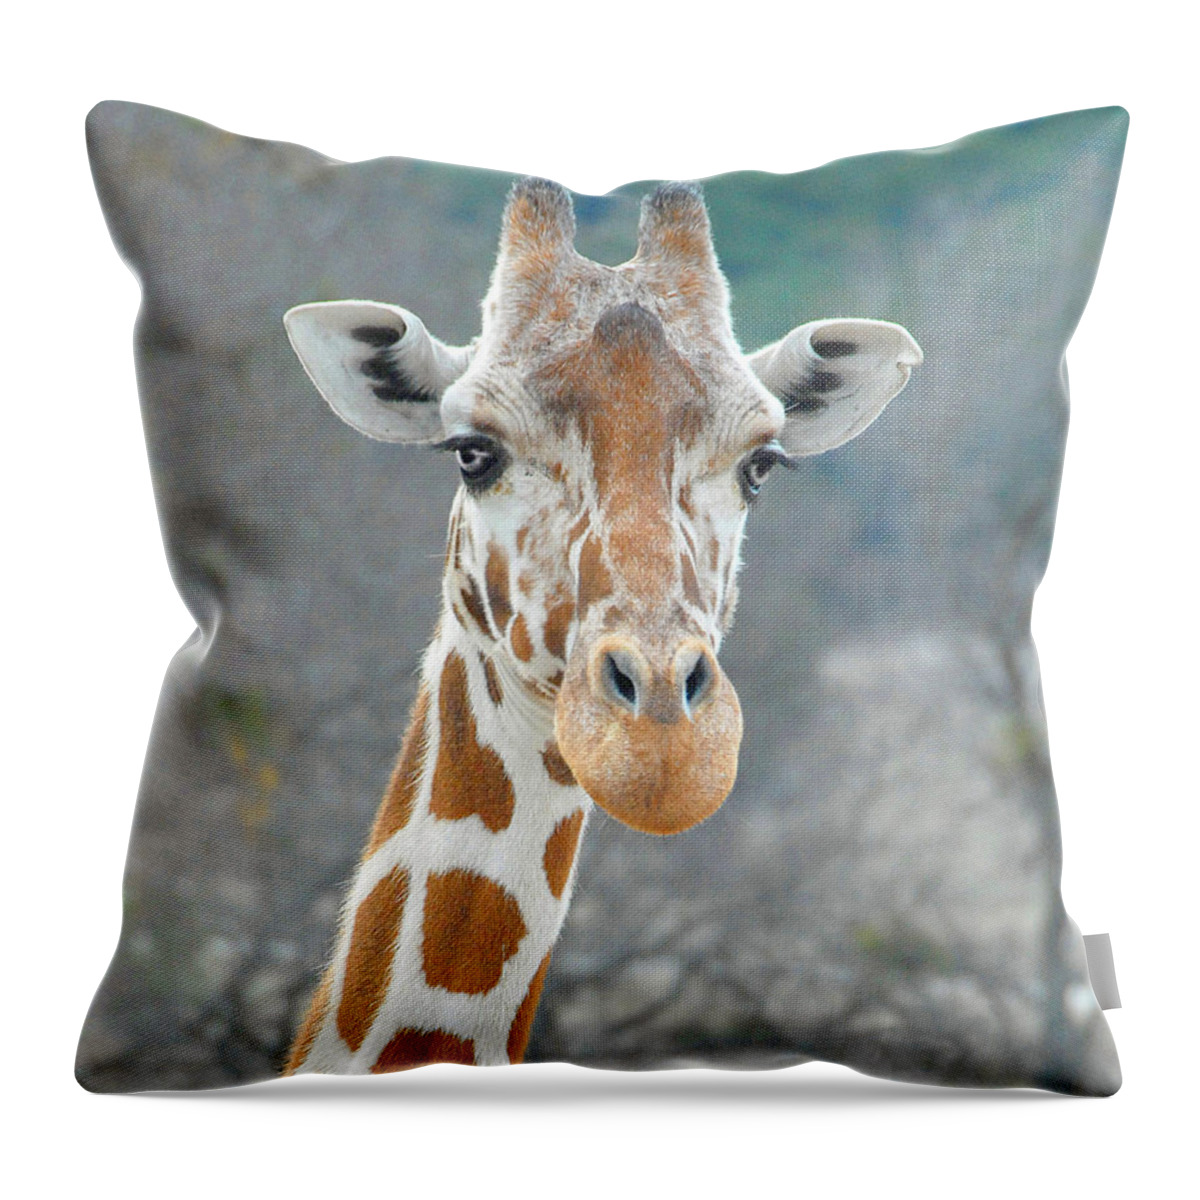 Giraffe Throw Pillow featuring the photograph Here's Lookin' at You by Dyle  Warren